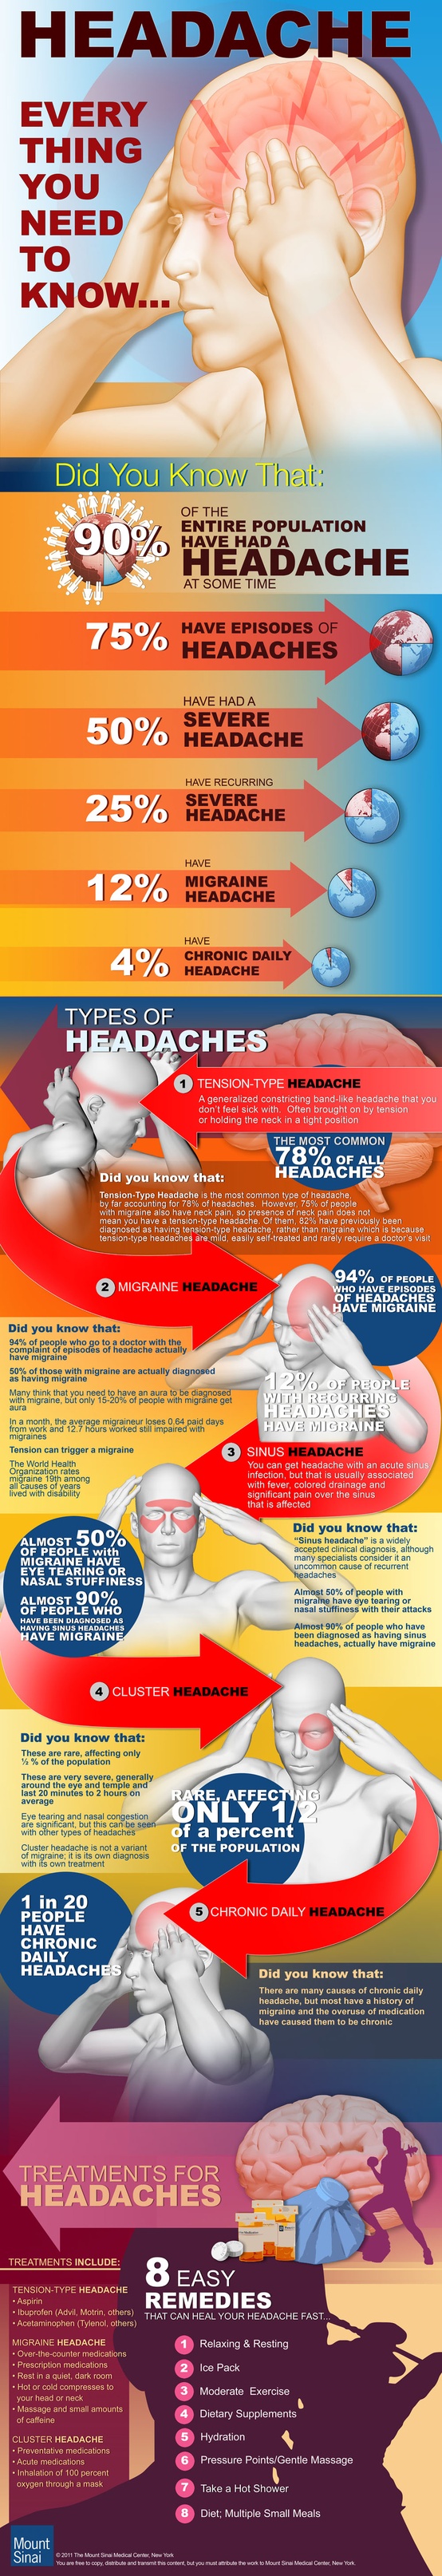 InfoGraphic on Headaches